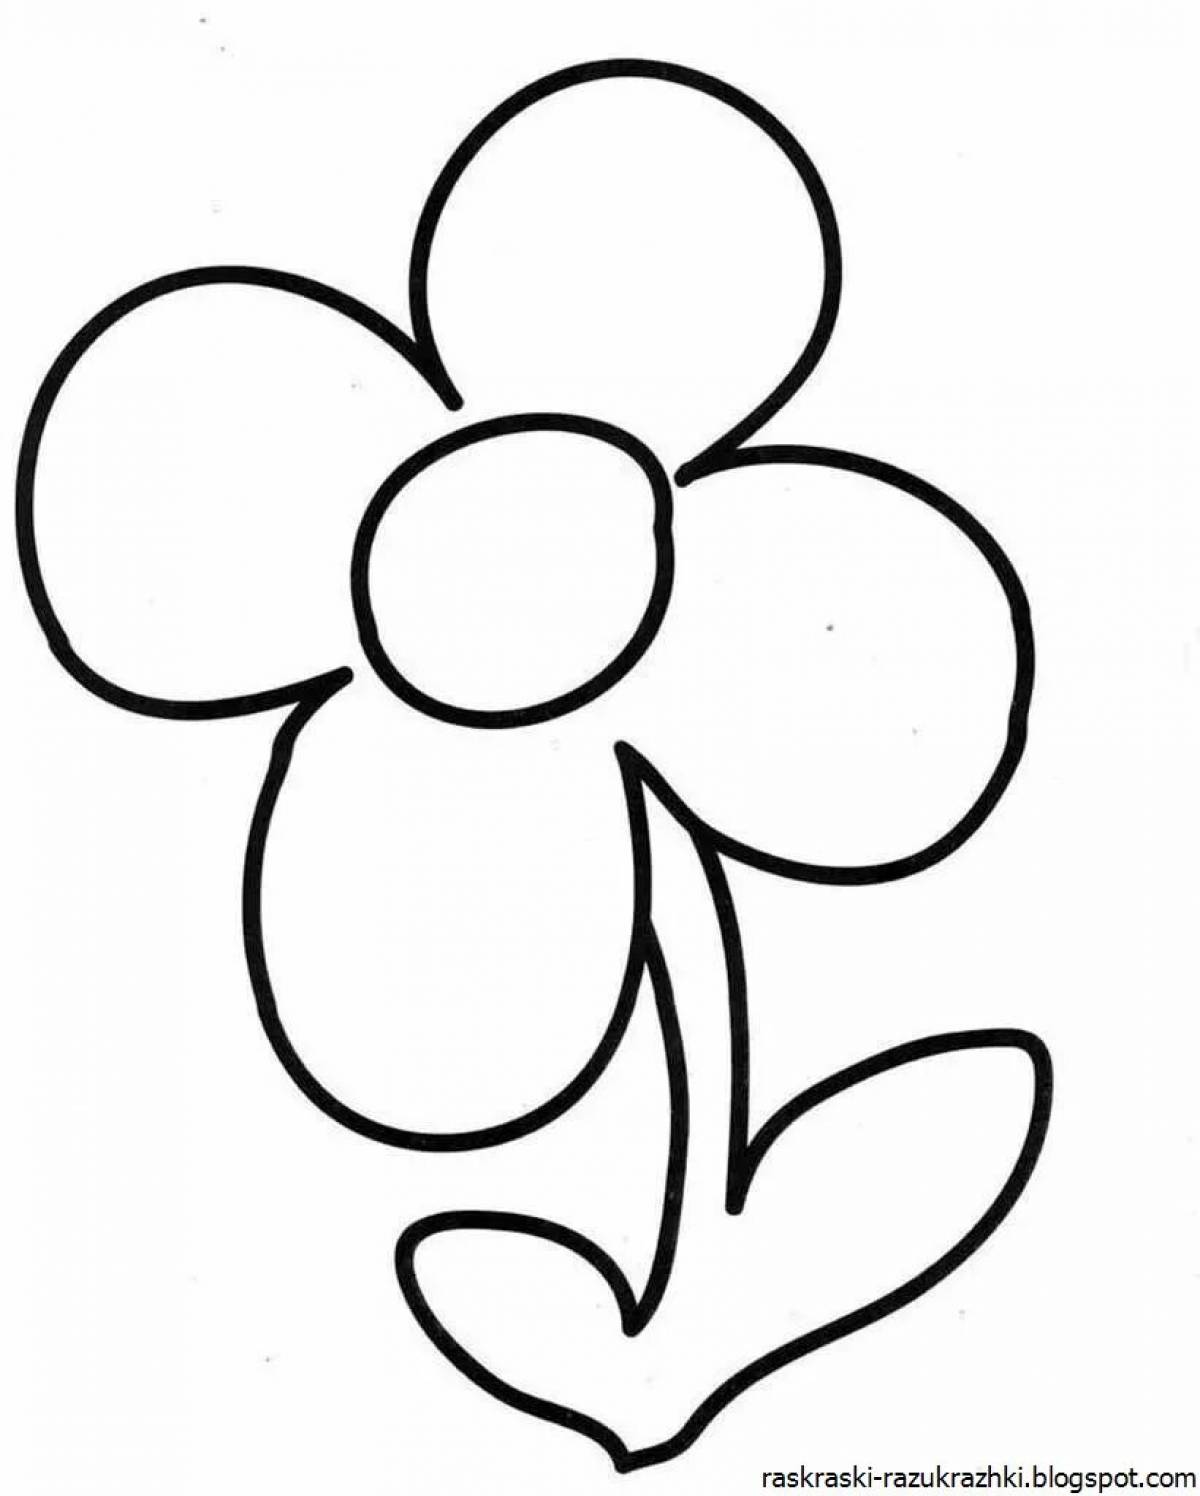 Serene coloring flowers for children 2-3 years old